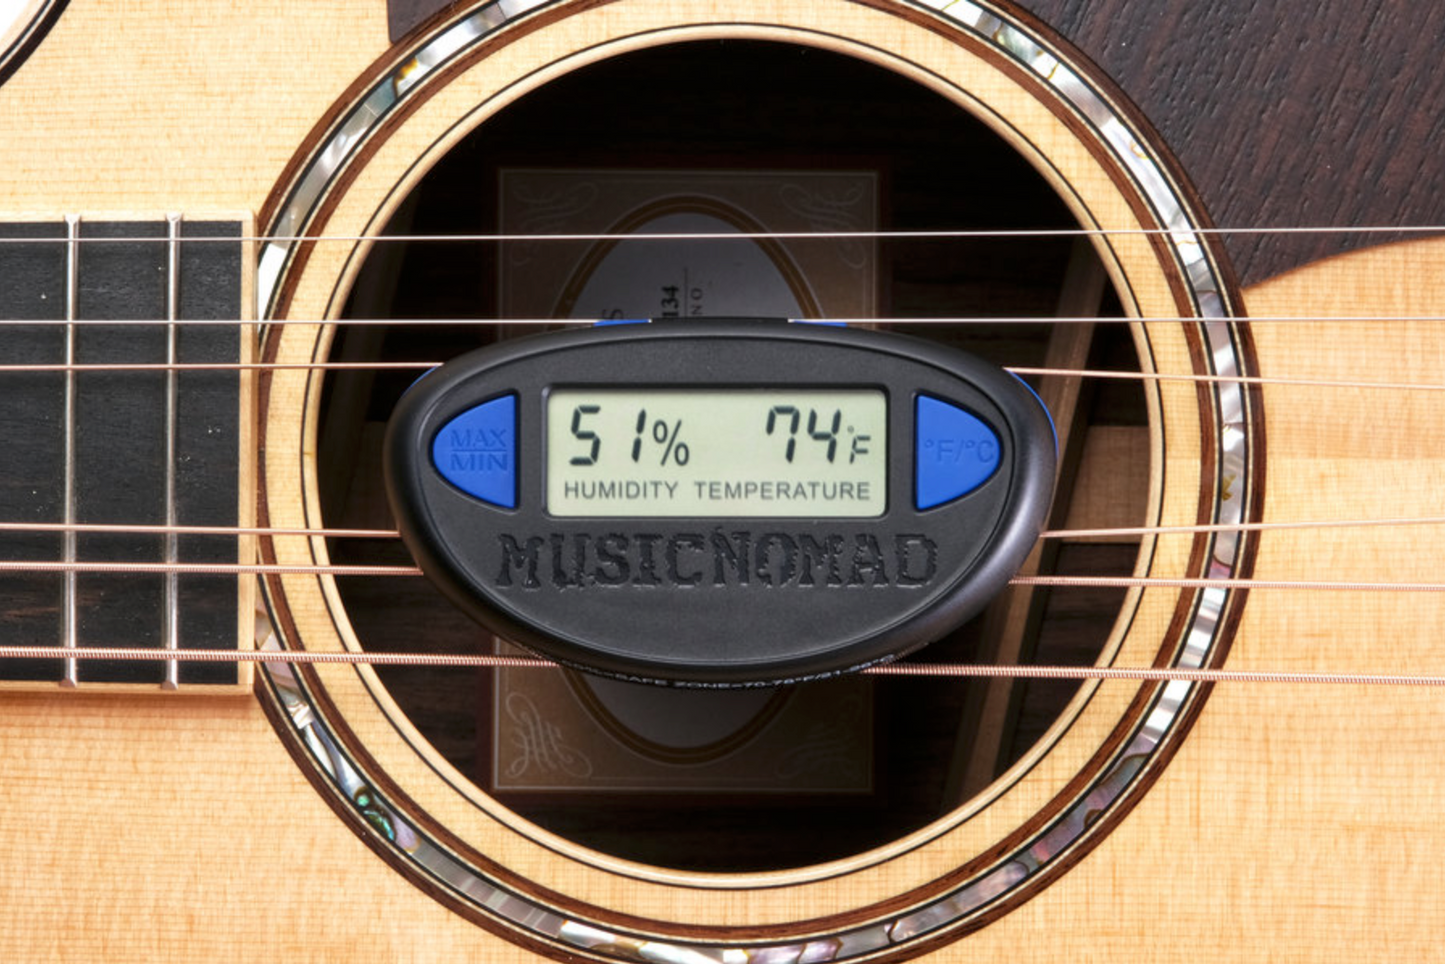 Music Nomad The Humitar One - Acoustic Guitar Humidifier & Hygrometer S/N:MN311